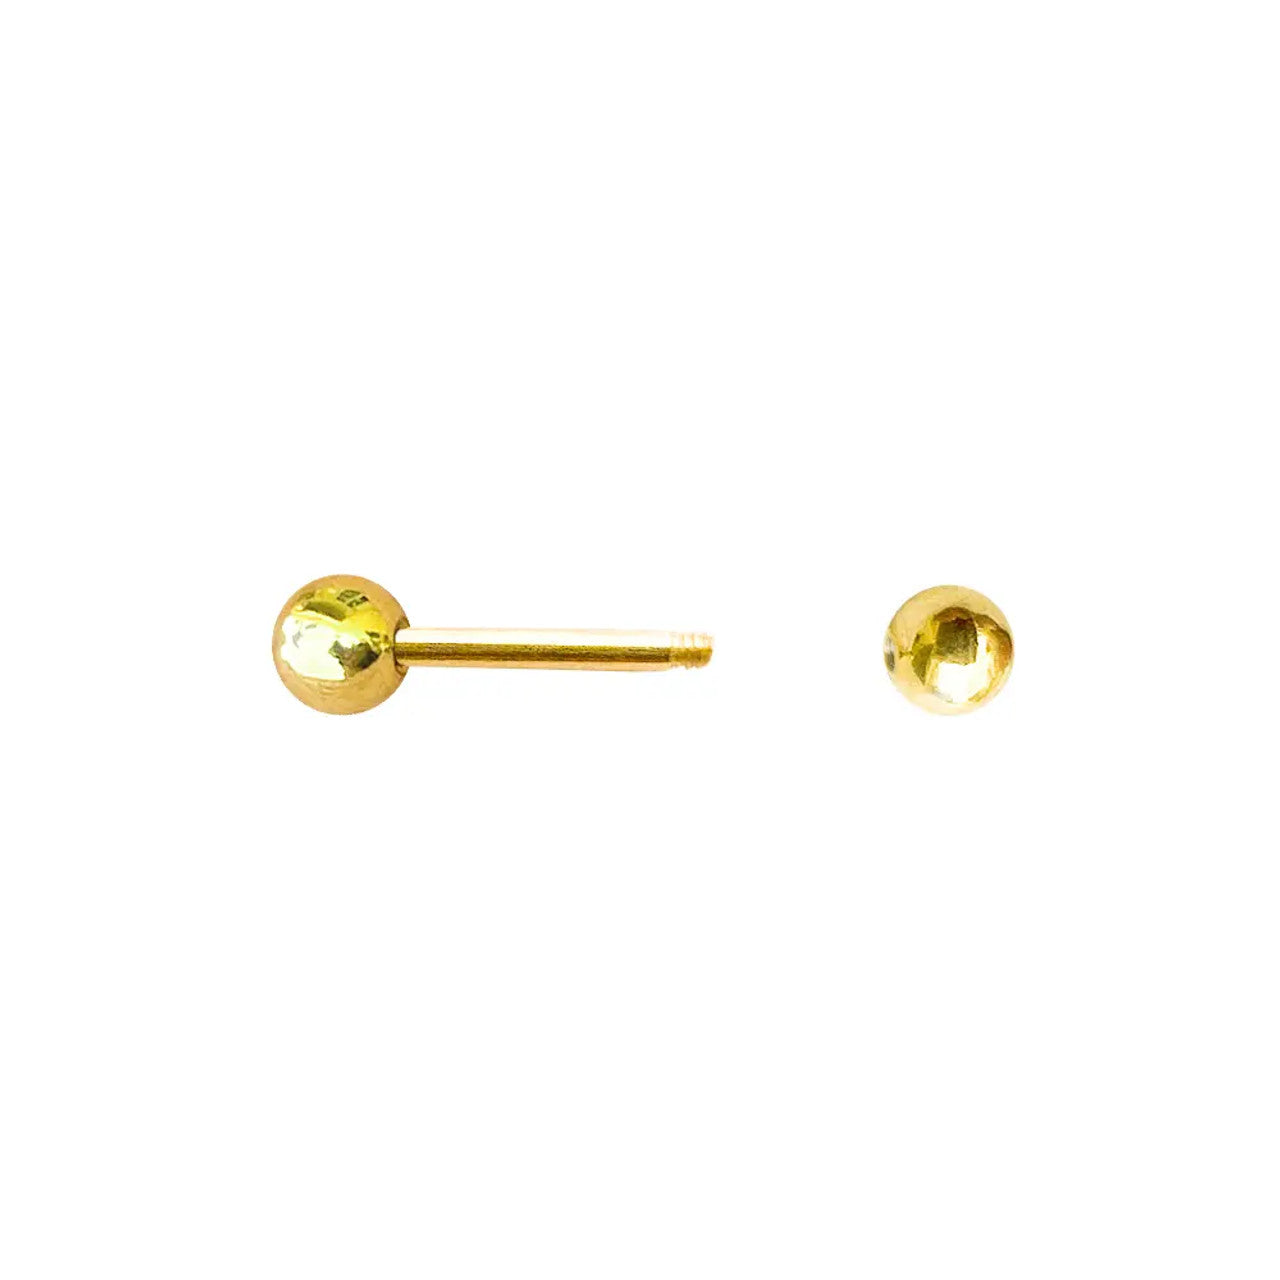 14 Karat Gold Straight Barbell 14 Gauge 1/2" to 1" for Tongue & Nipple